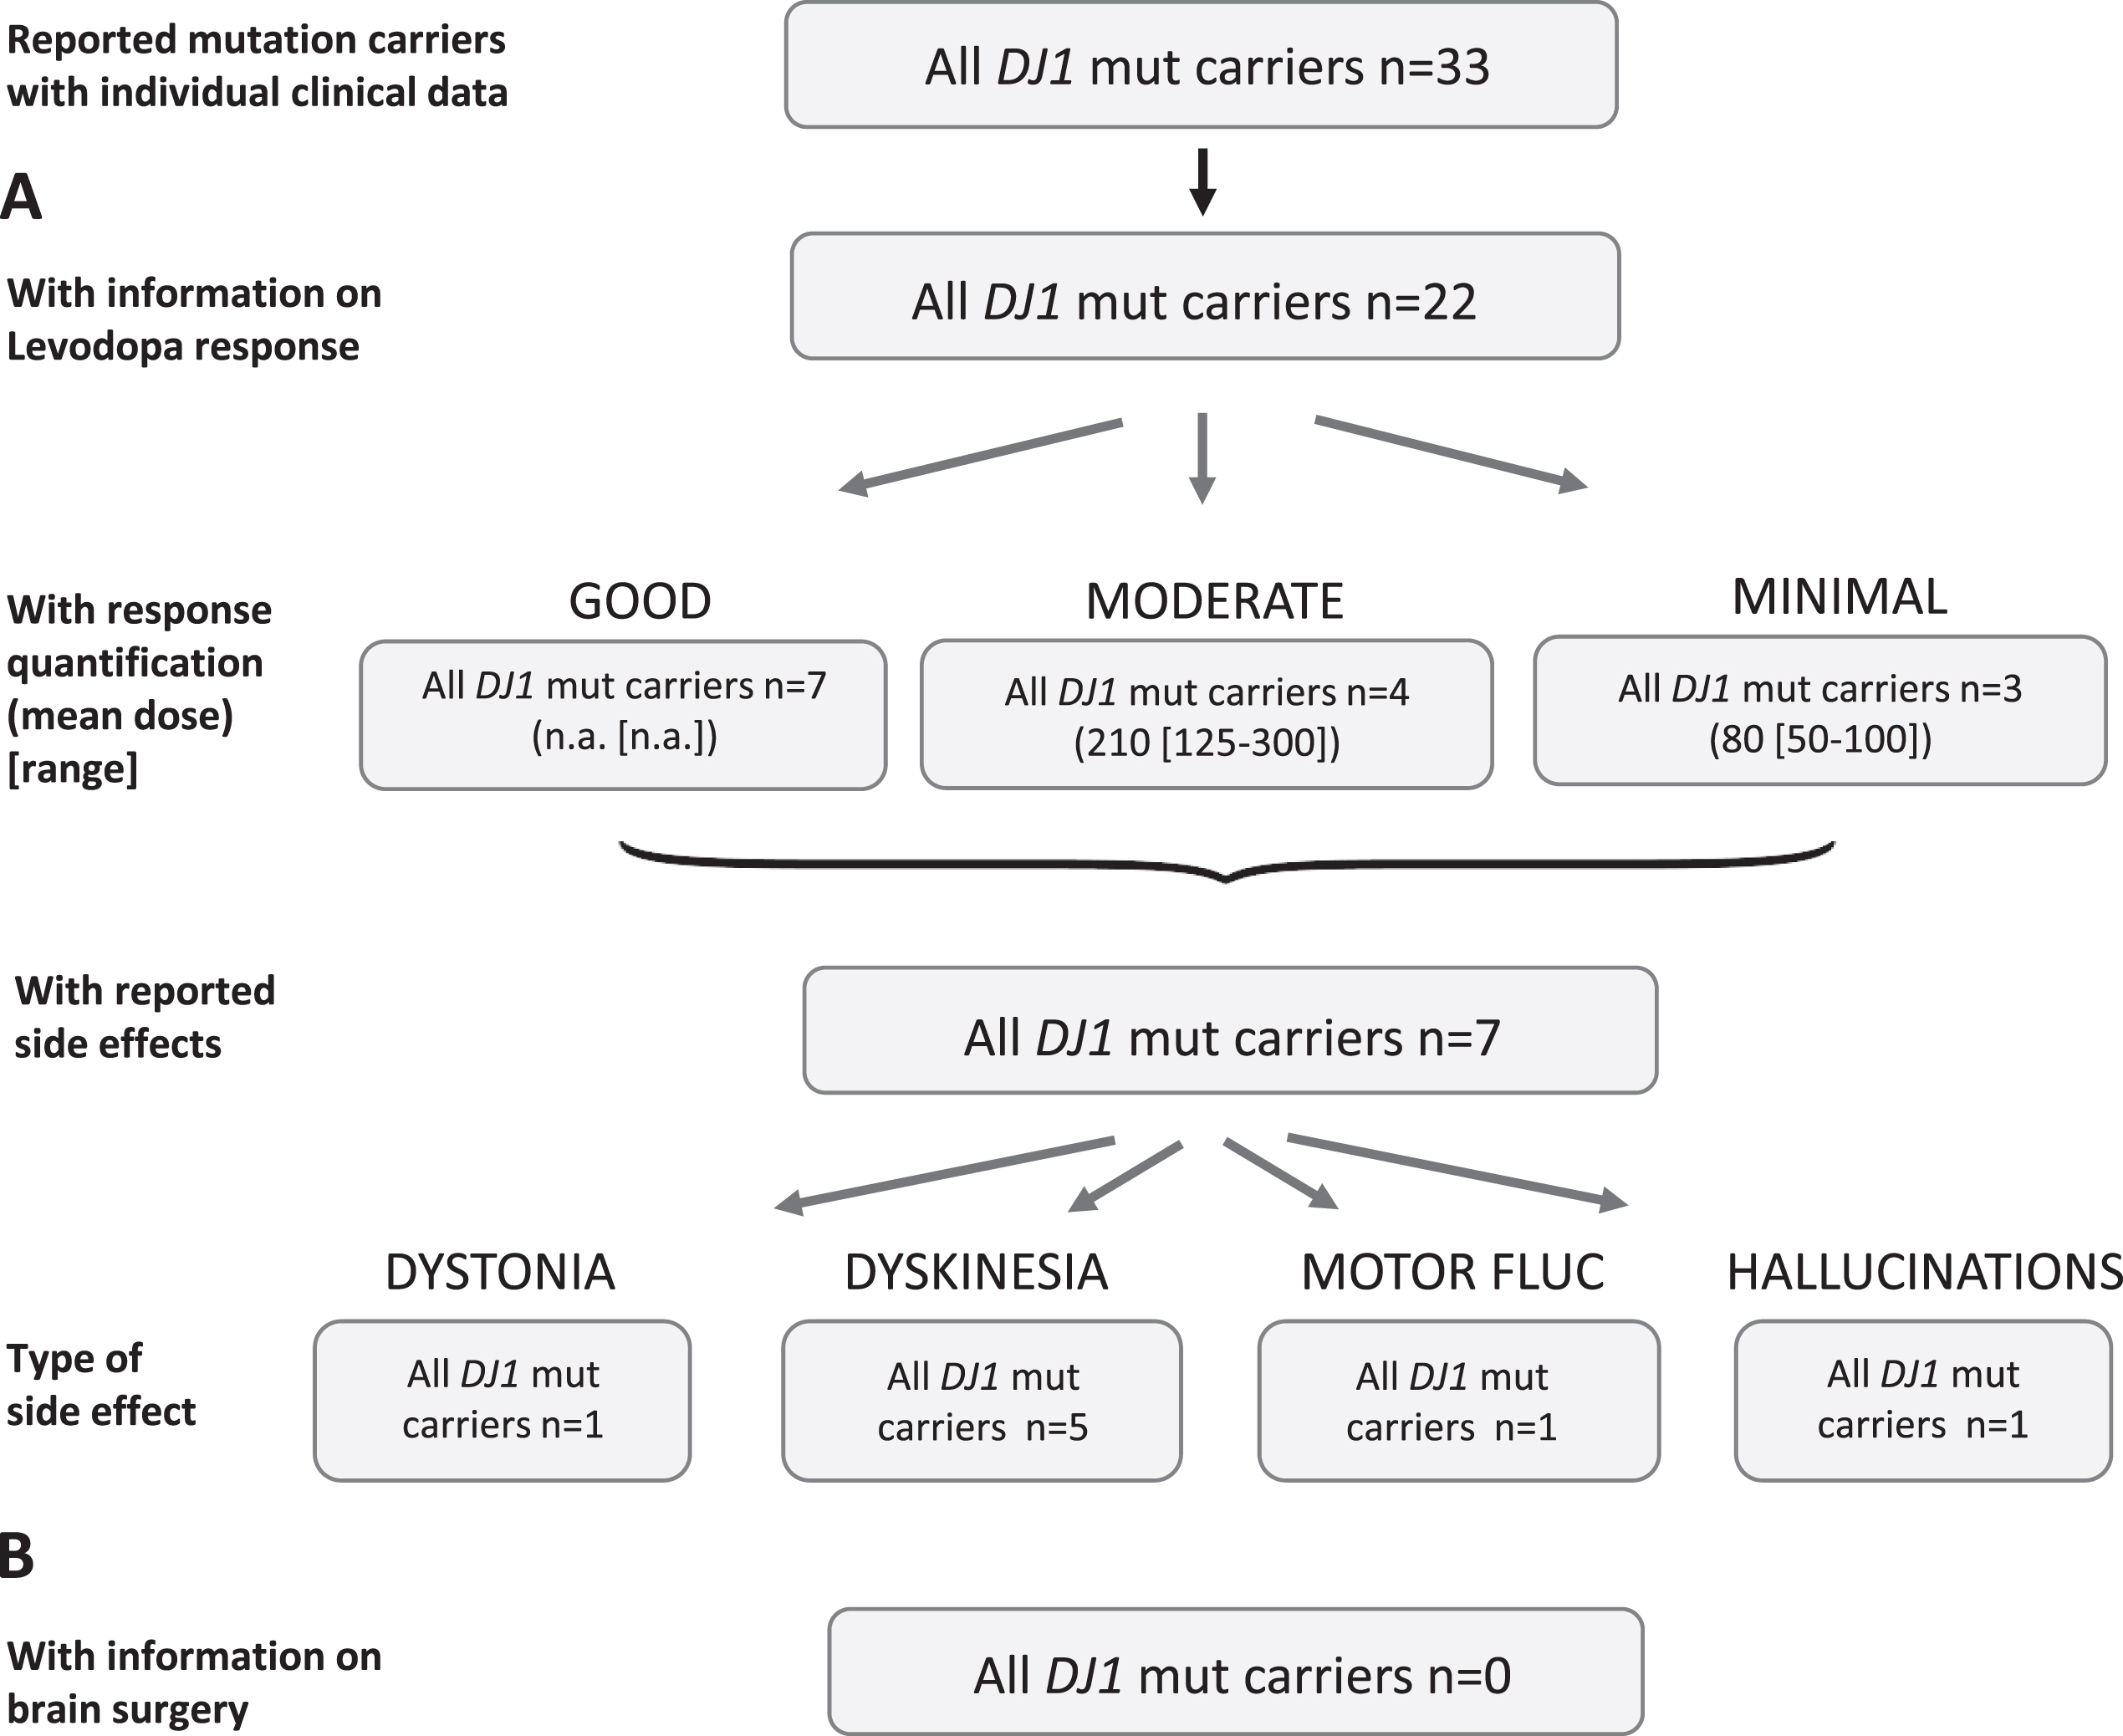 Results of the systematic literature review for DJ1 mutation carriers. A) The chart shows information on carriers of DJ1 mutations with levodopa treatment, respective response and side effects. Due to the low number of recurrent mutations, no subdivision for the most frequent mutations has been included. B) No patient with brain surgery has been reported.